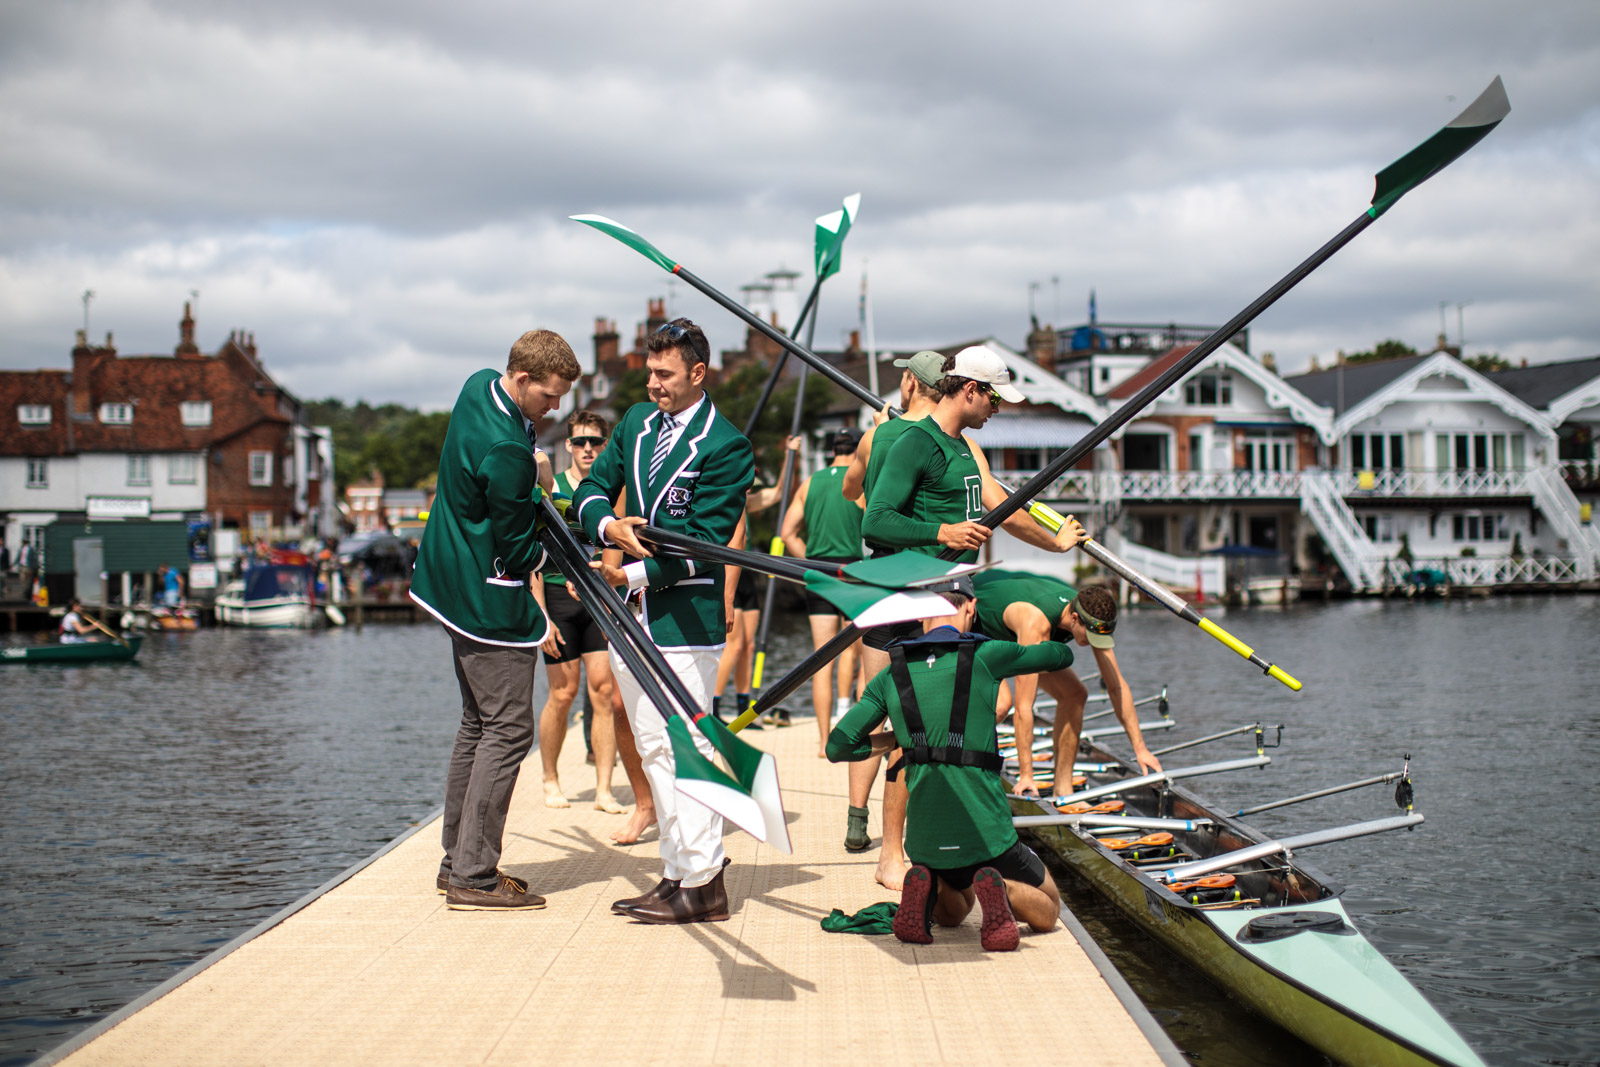  A rowing crew prepare ahead of a race at the Henley Royal Regatta on June 30, 2017 in Henley-on-Thames. 